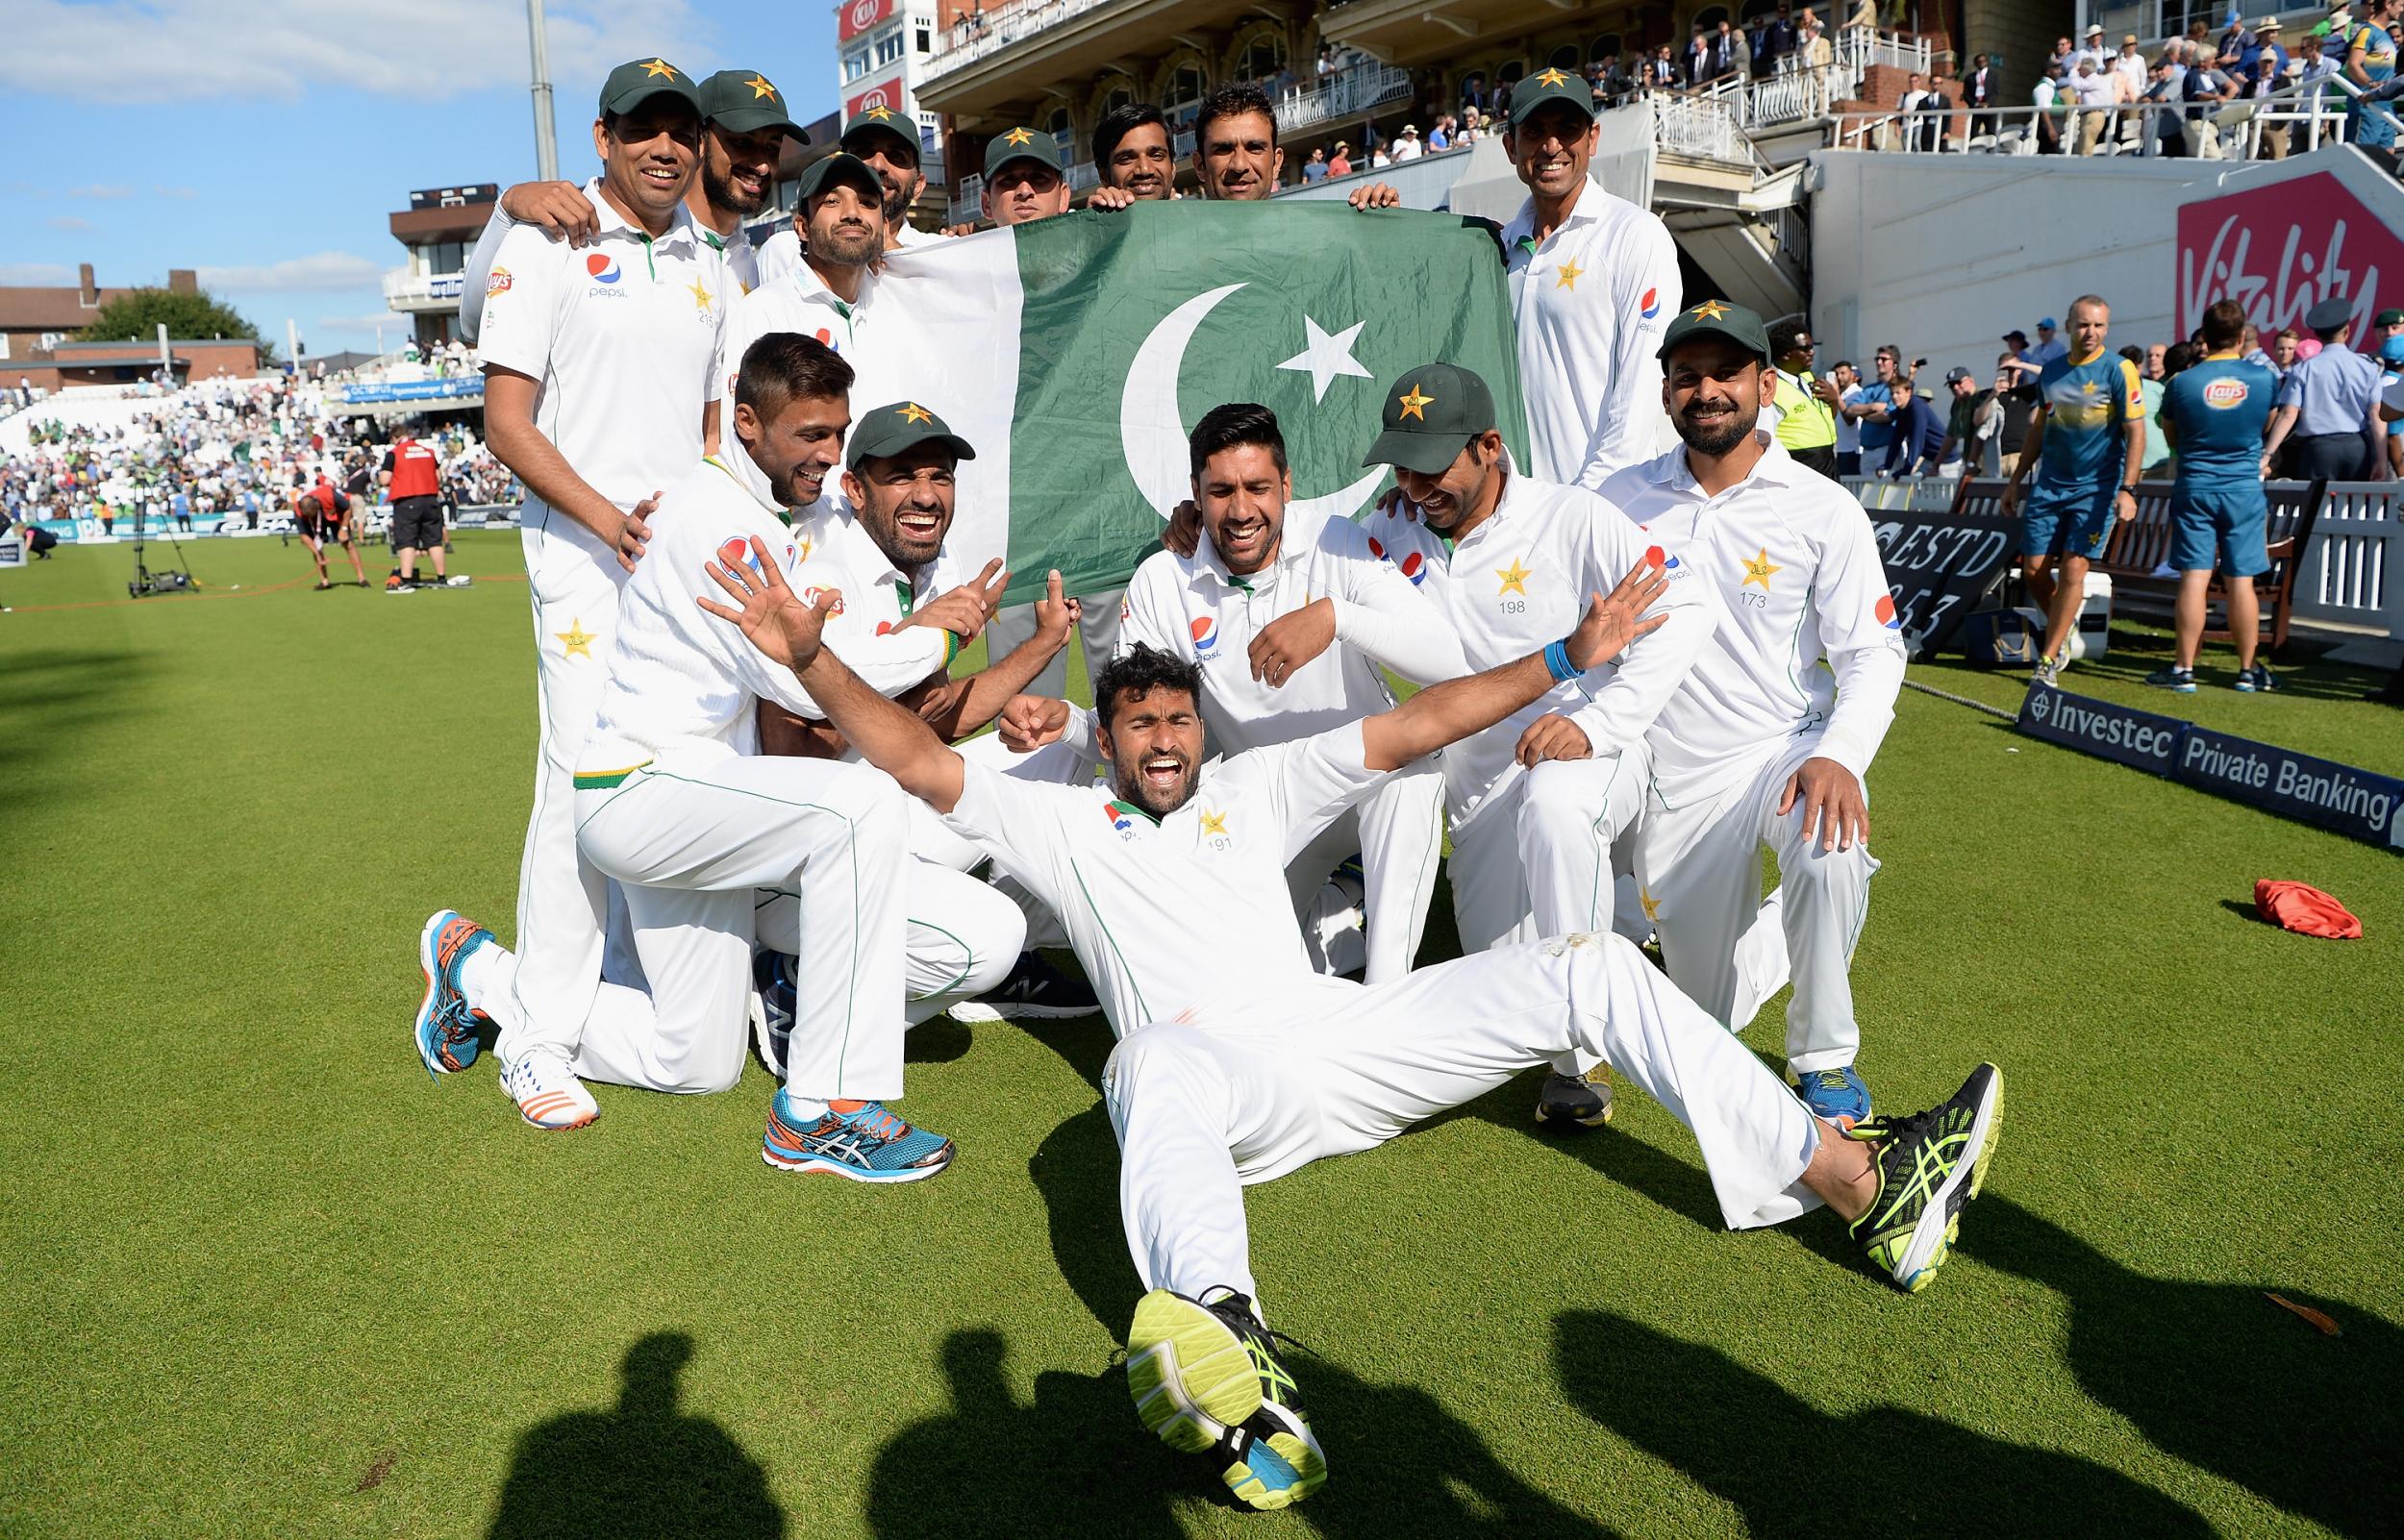 Pakistan celebrate after winning the 4th Investec Test between England and Pakistan at The Kia Oval